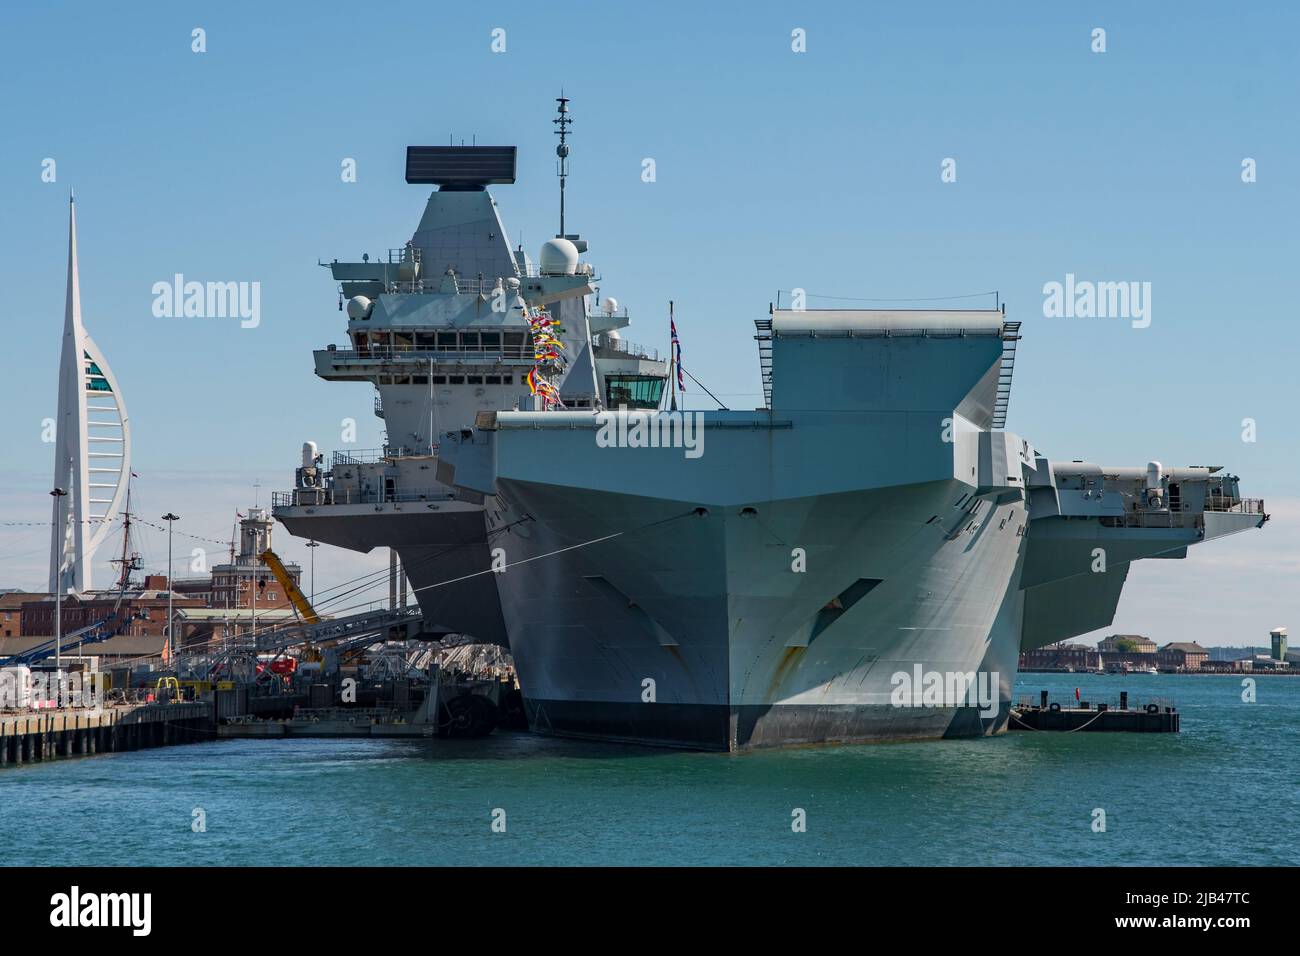 HMS Queen Elizabeth dressed overall for the Queen's Platinum Jubilee. Seen alongside at Portsmouth Naval Base, UK on Coronation Day the 2nd June 2022. Stock Photo